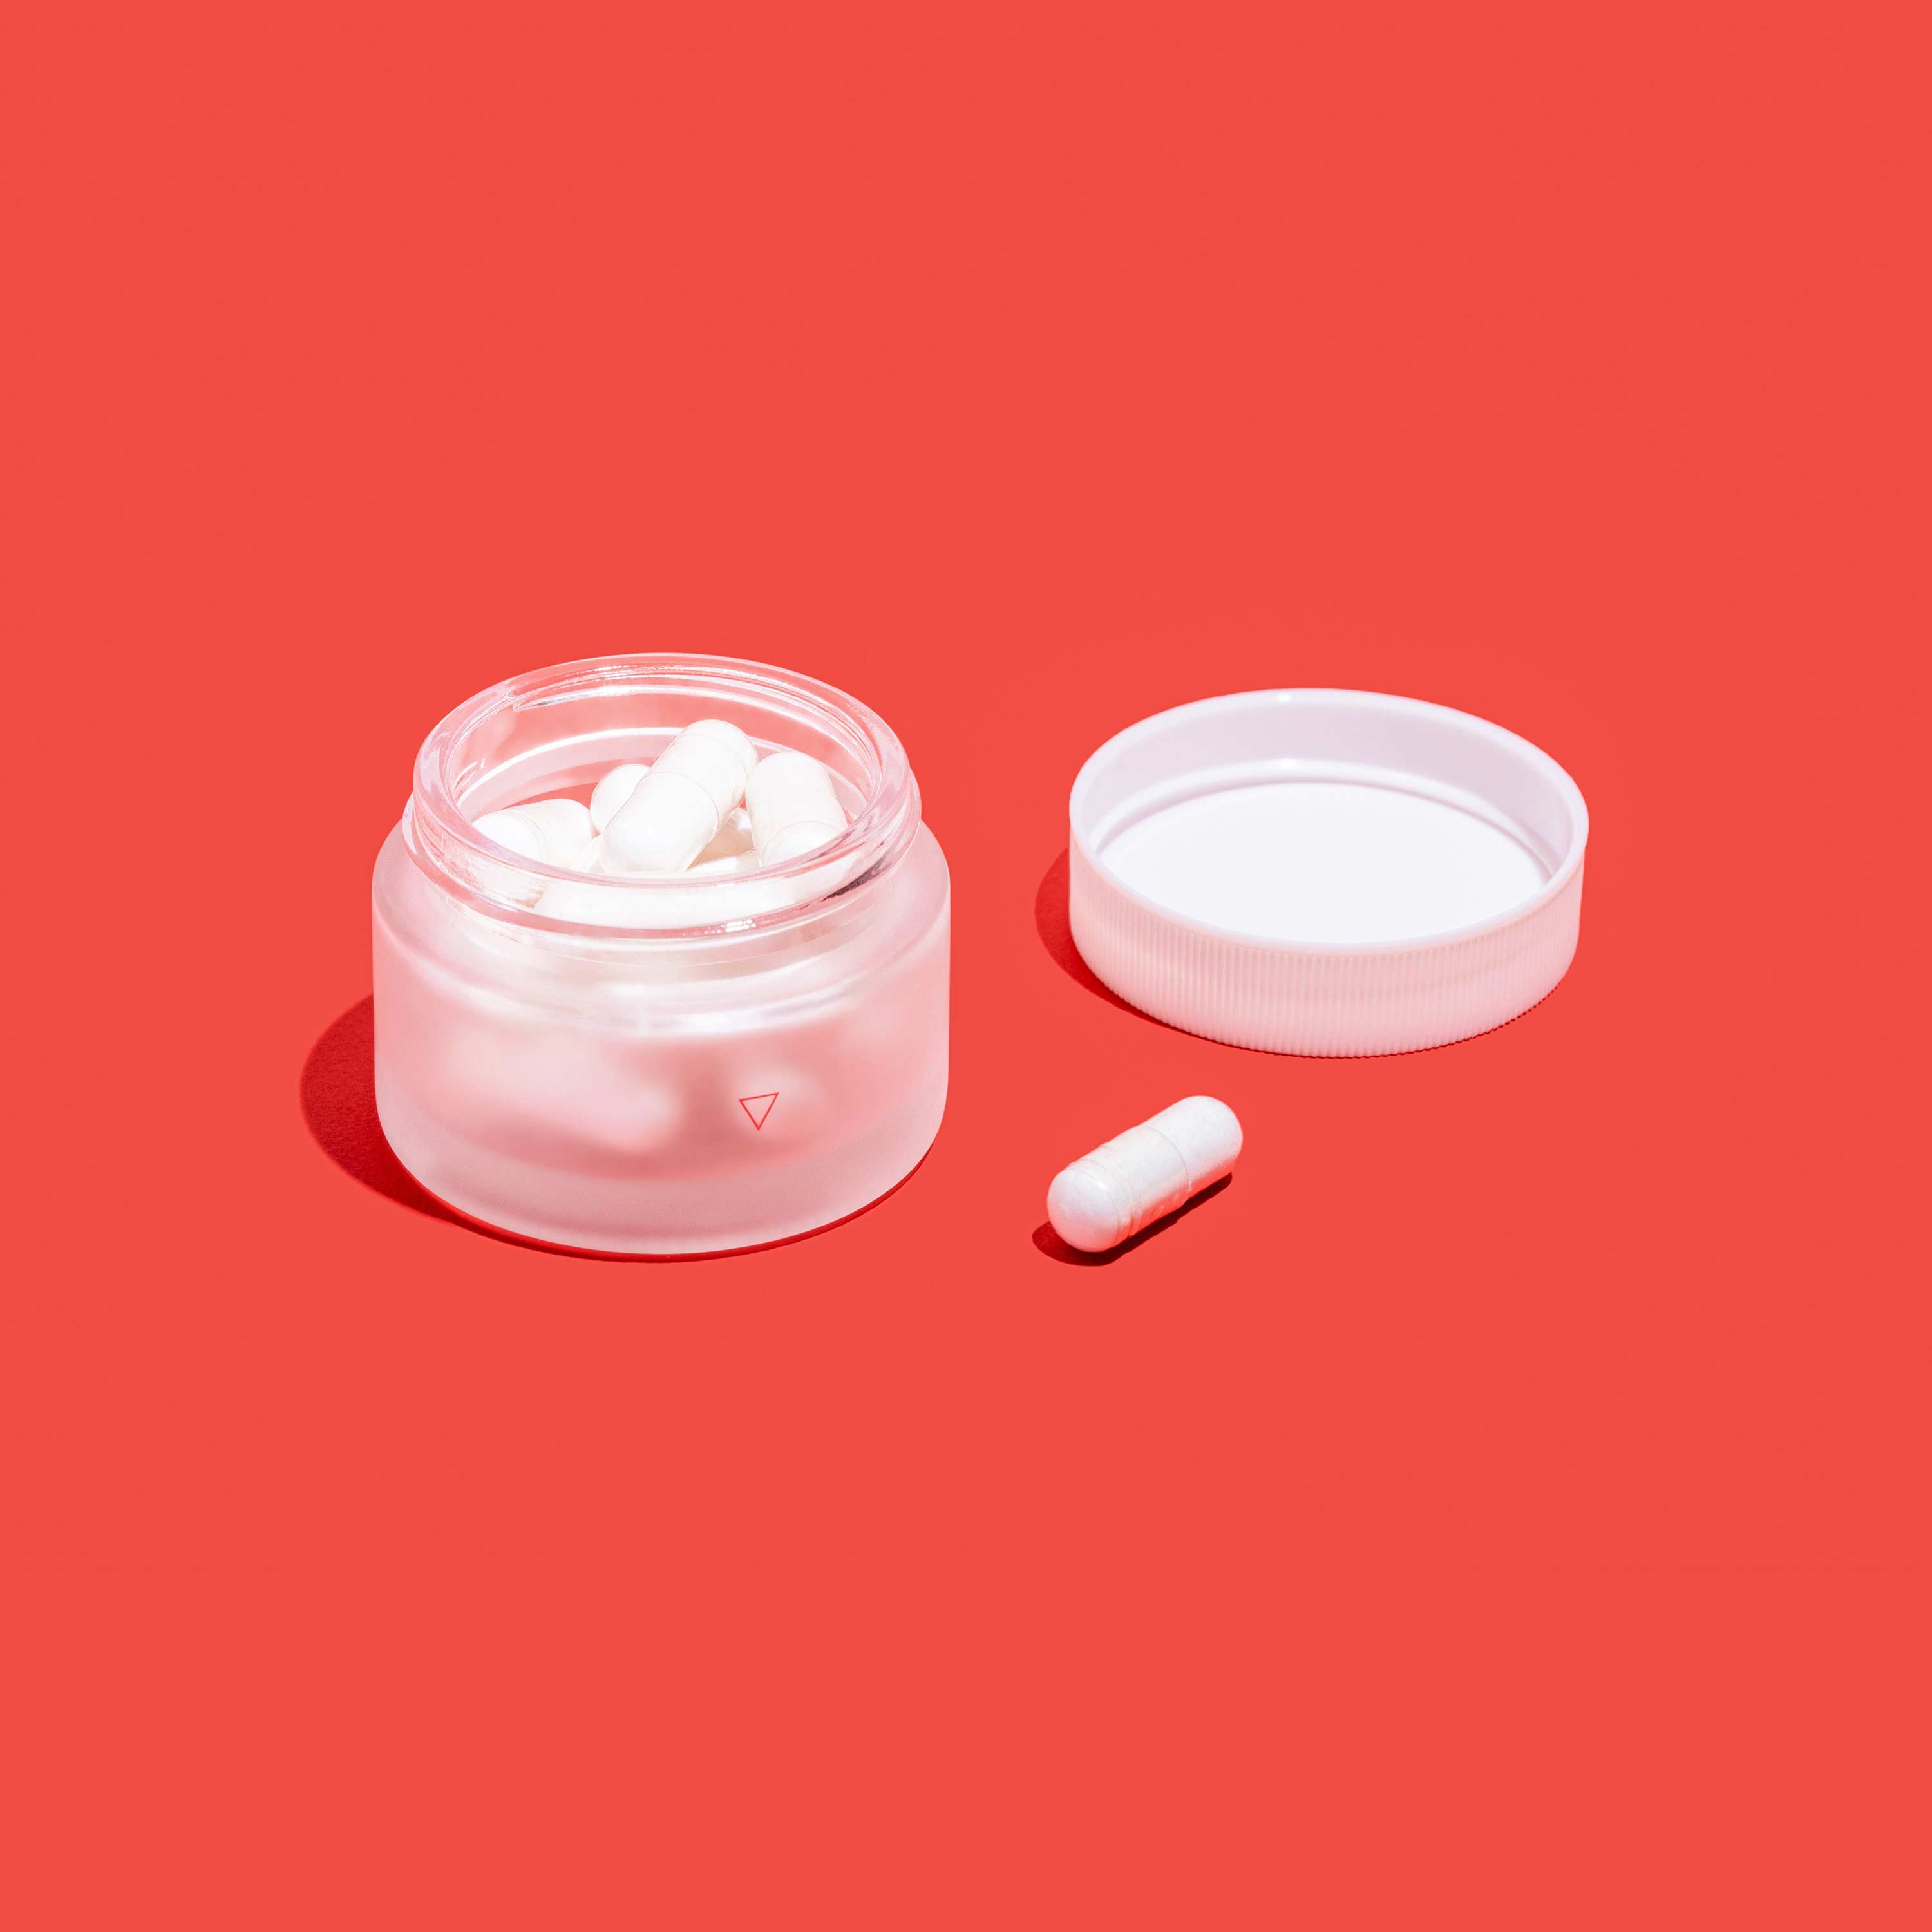 Open jar of boric acid suppositories on red surface